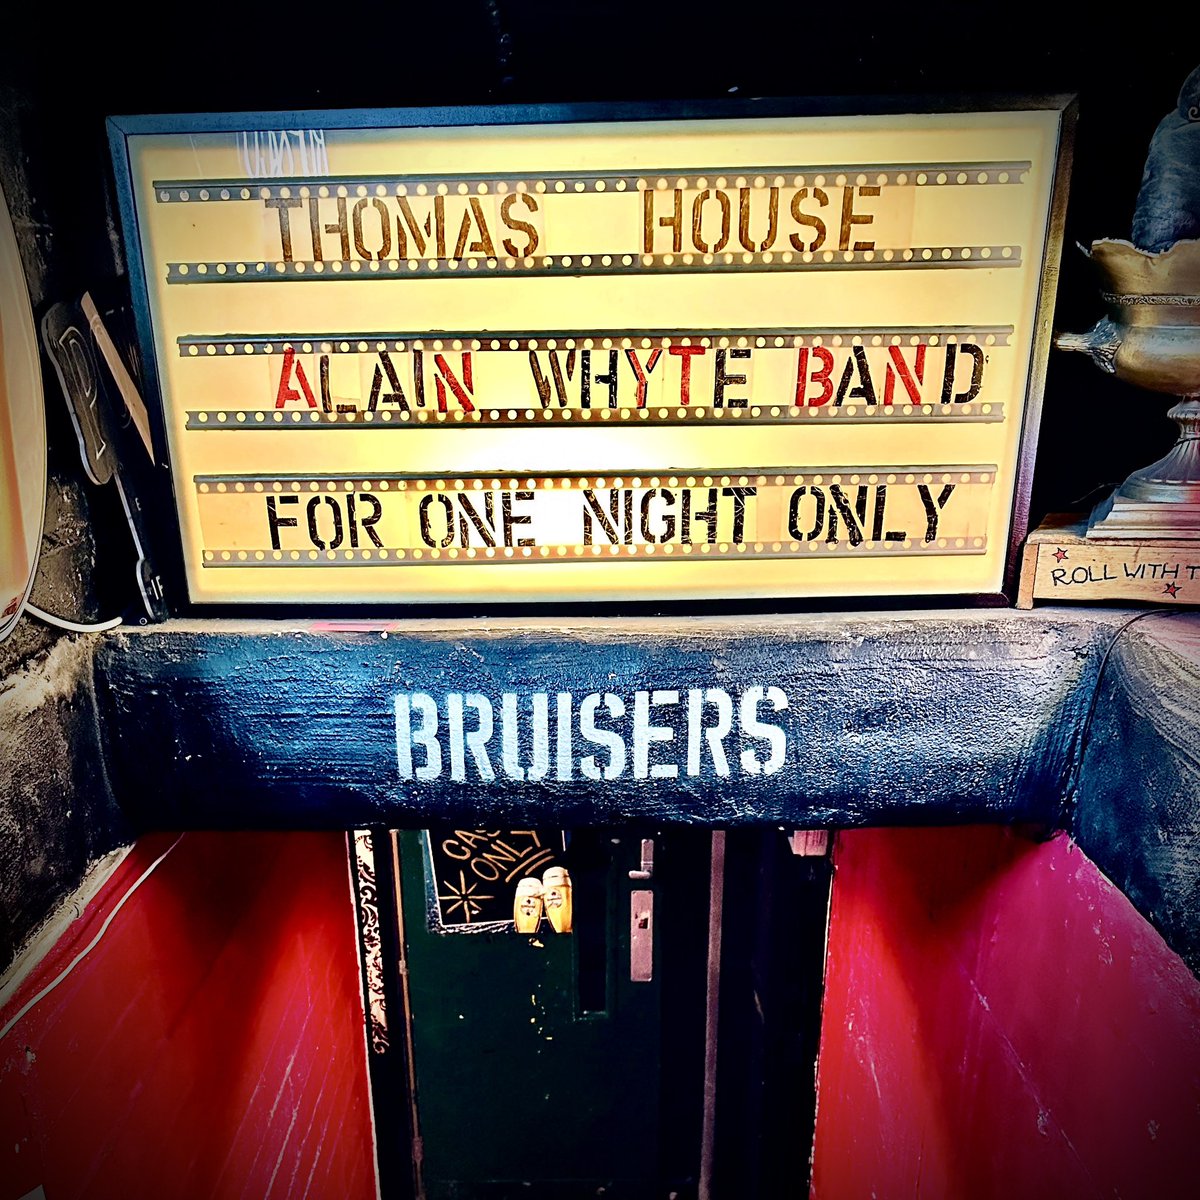 In case you hadn't heard... FREE GIG at The Thomas House in Dublin Tuesday, 28th of November. Doors at 8:30. Band hits the stage at 9pm. First come first served basis. Come join us for what will certainly be a night to remember! #alainwhyte #alainwhytemusic #alainwhytetour23